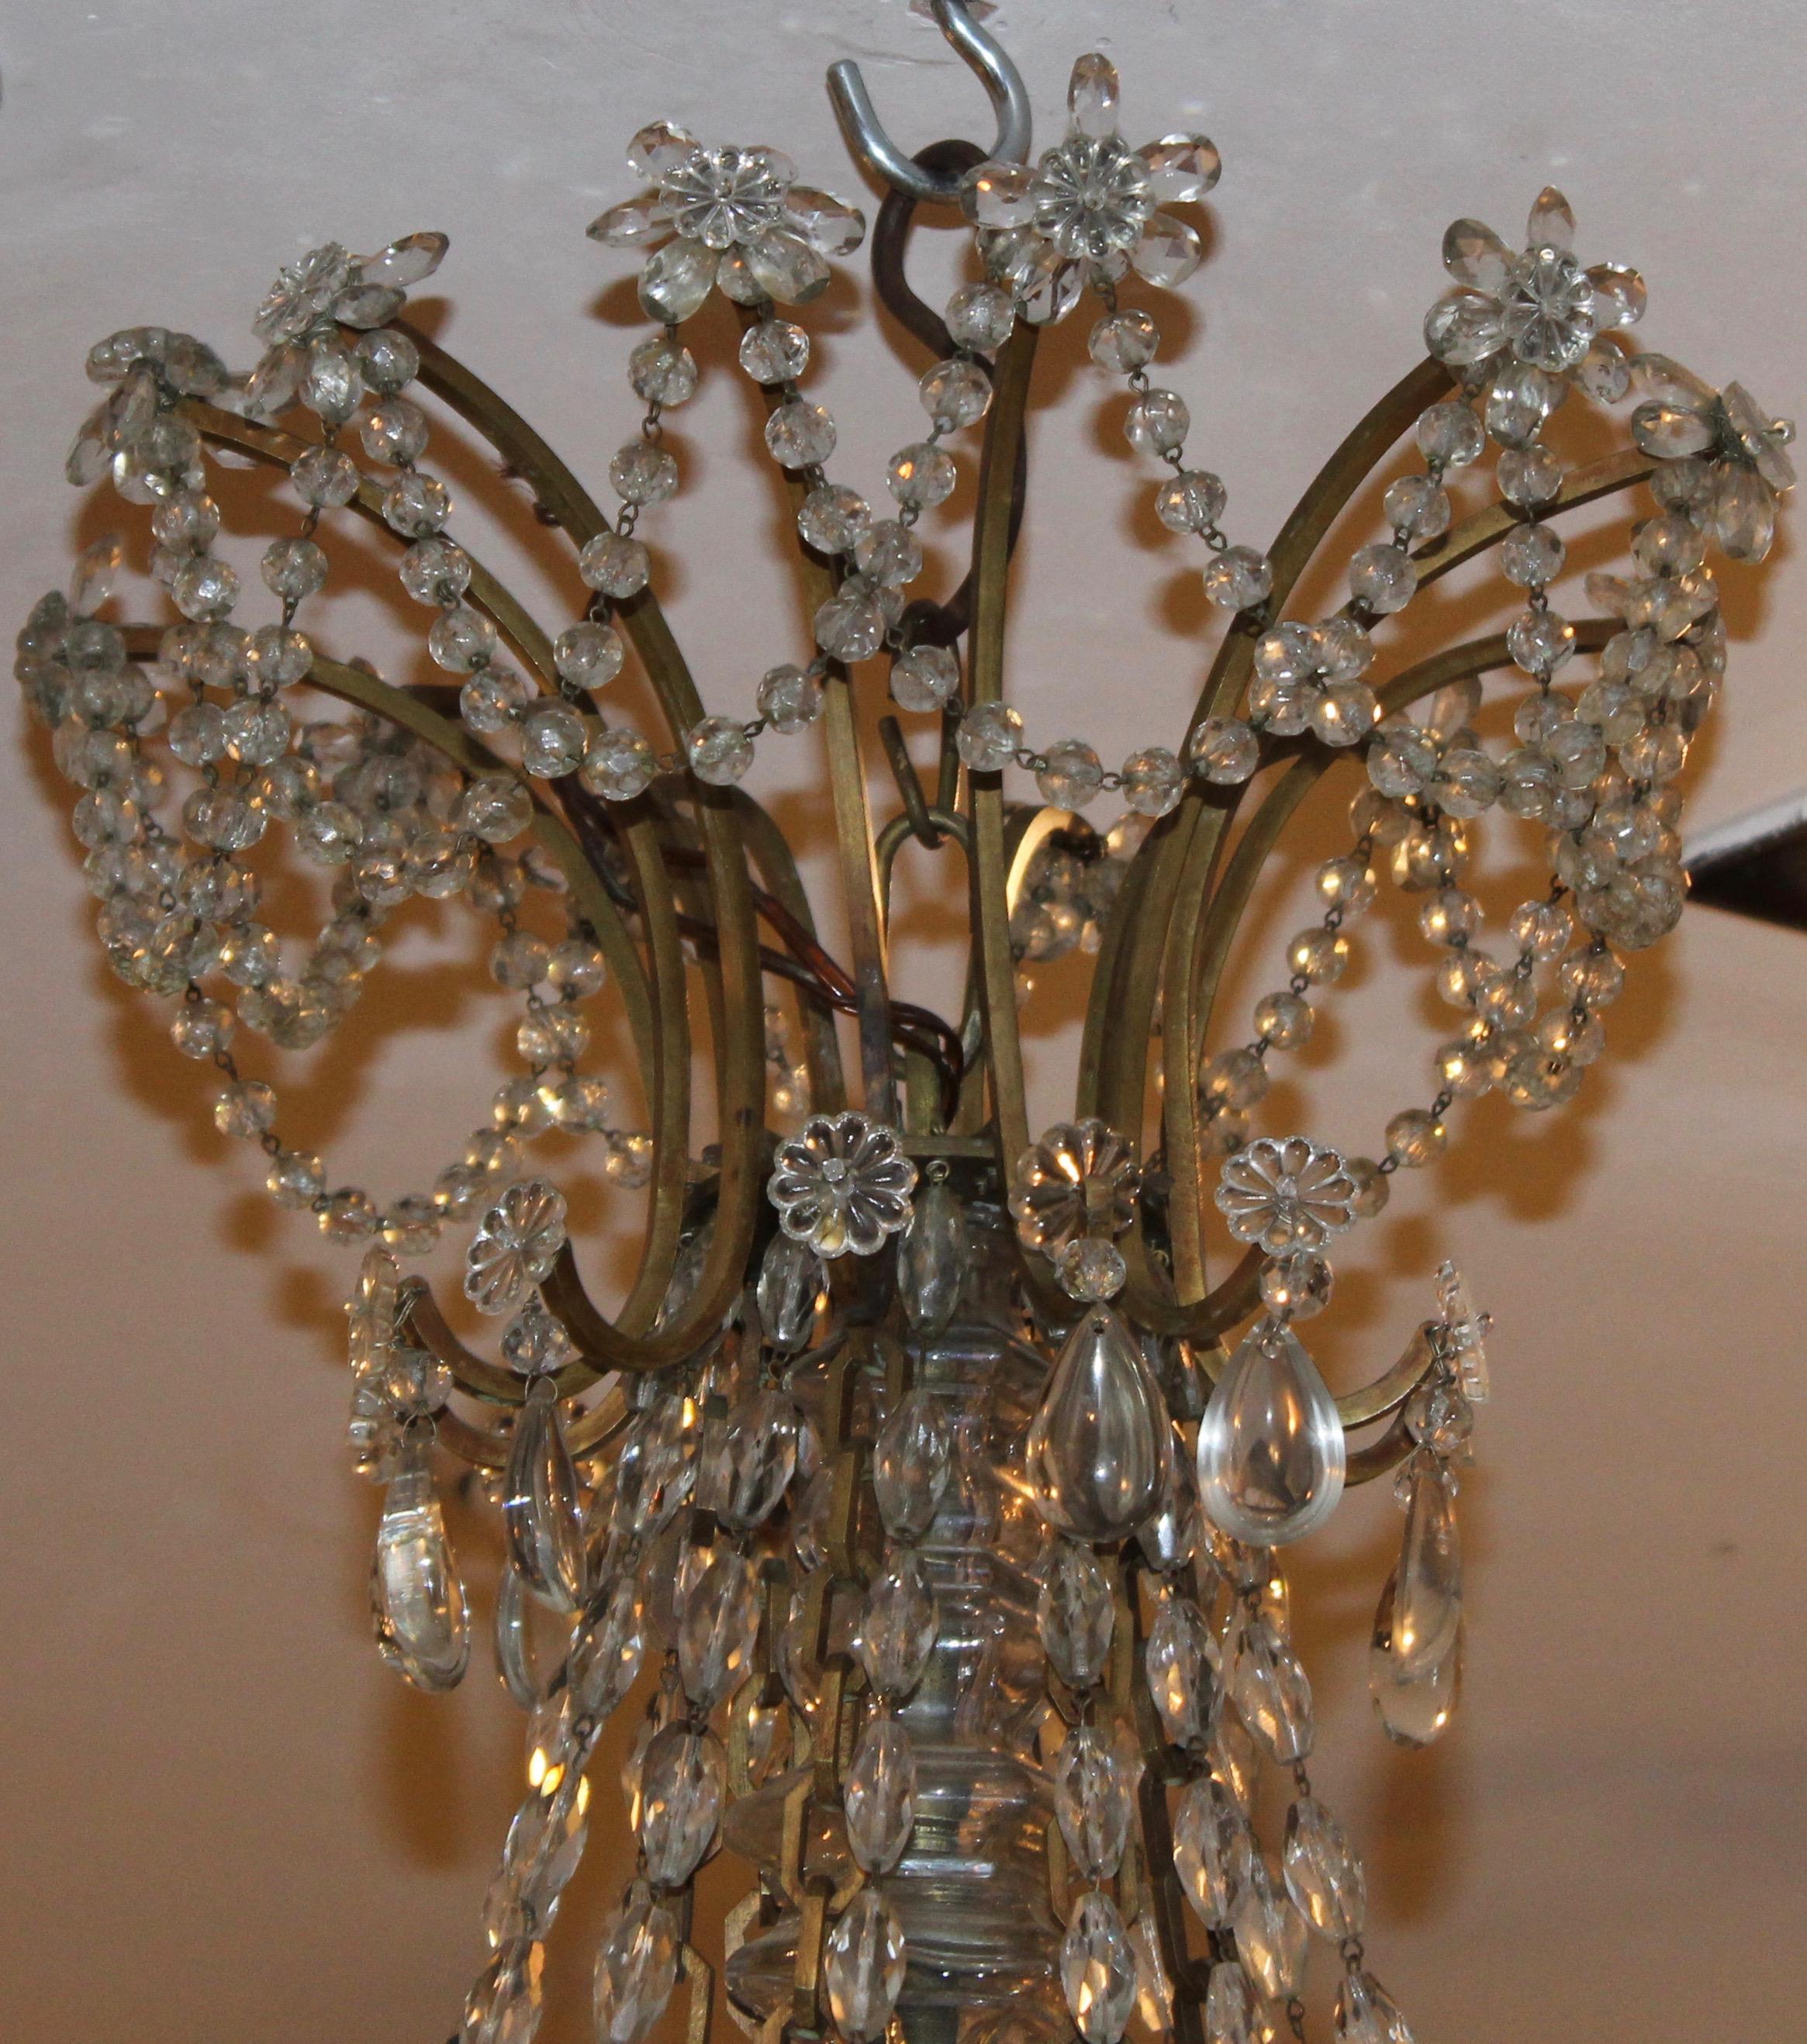 Exquisite French Baccarat style cut crystal drop chandelier, circa 1900. The simple bronze frame supports the twelve arms ad as well as the central crystal encased shaft , the chandelier features decorative metal chain that loosely connect the arms